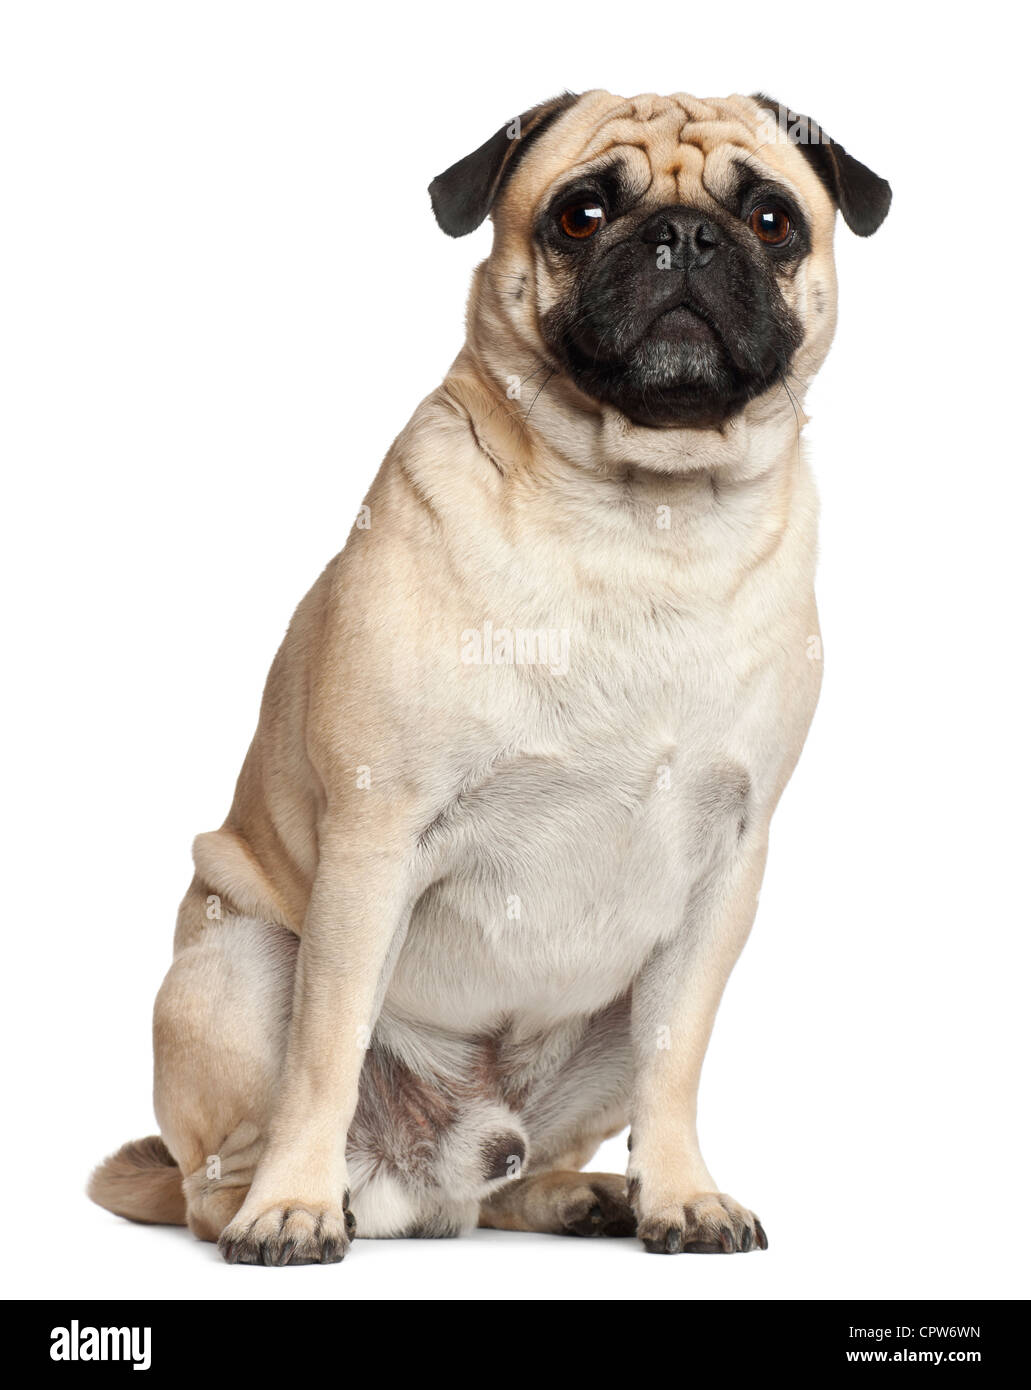 Pug, 3 years old, portrait sitting against white background Stock Photo